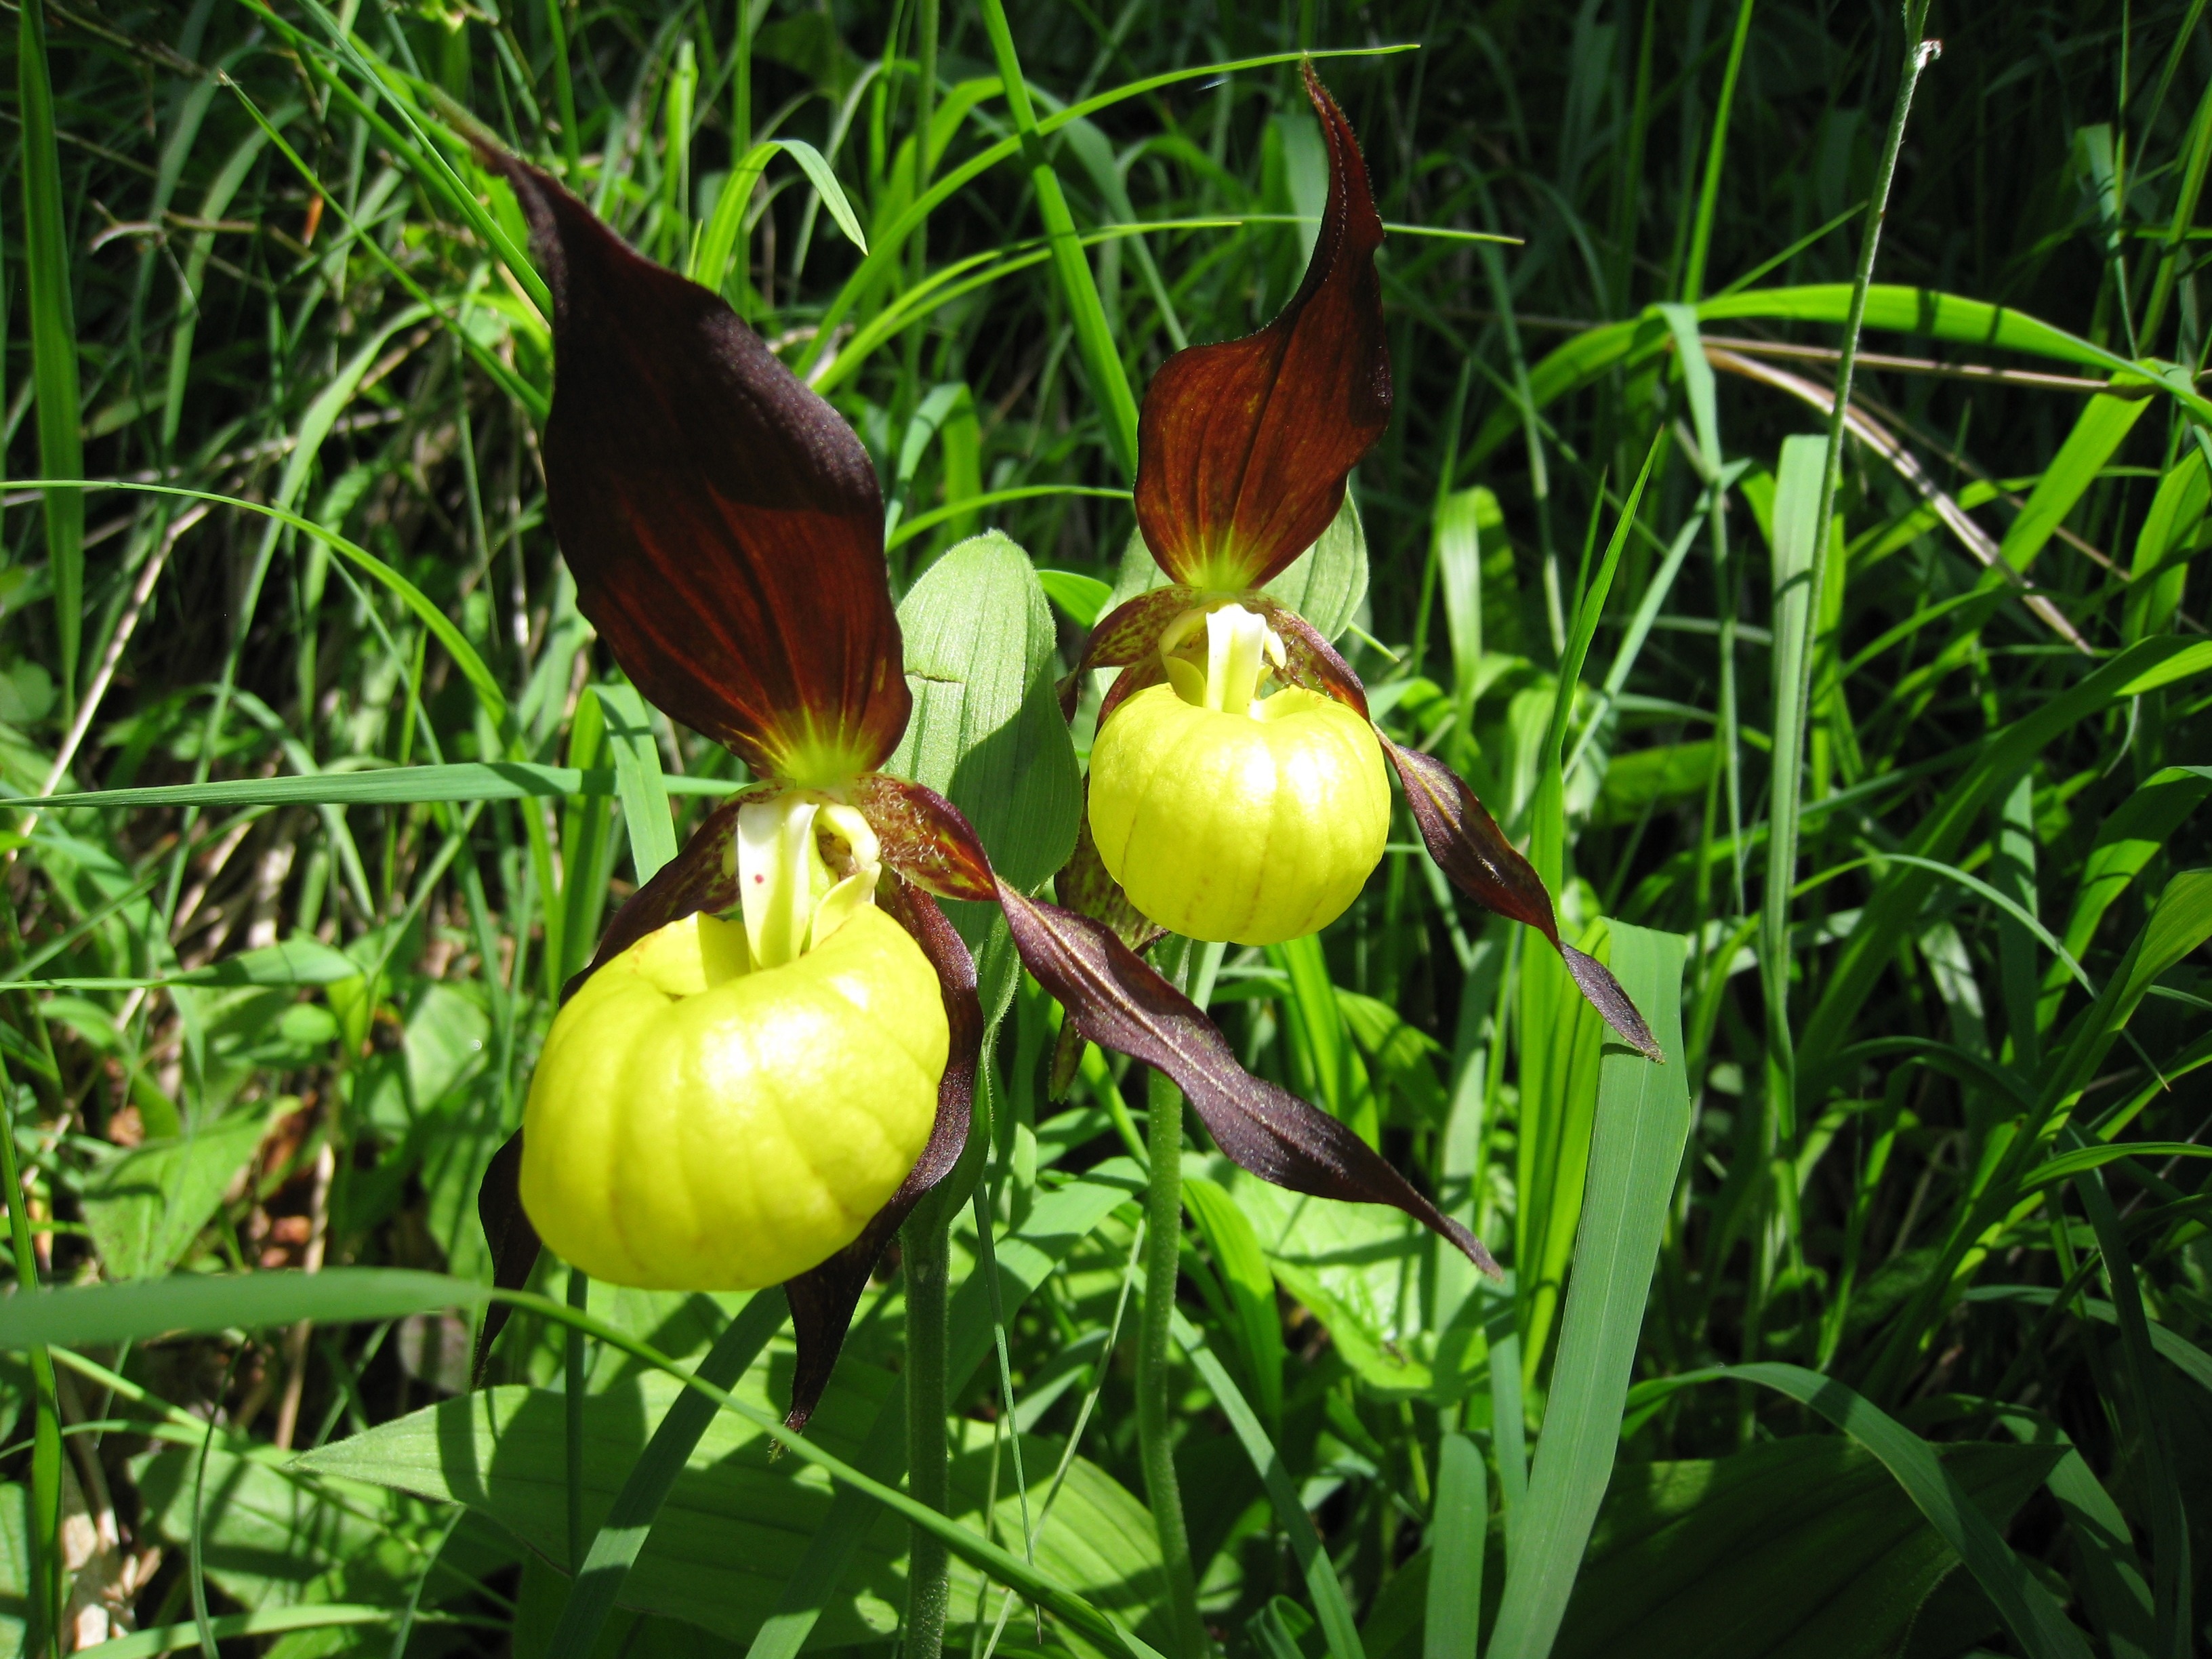 brown and green lady's slipper flower